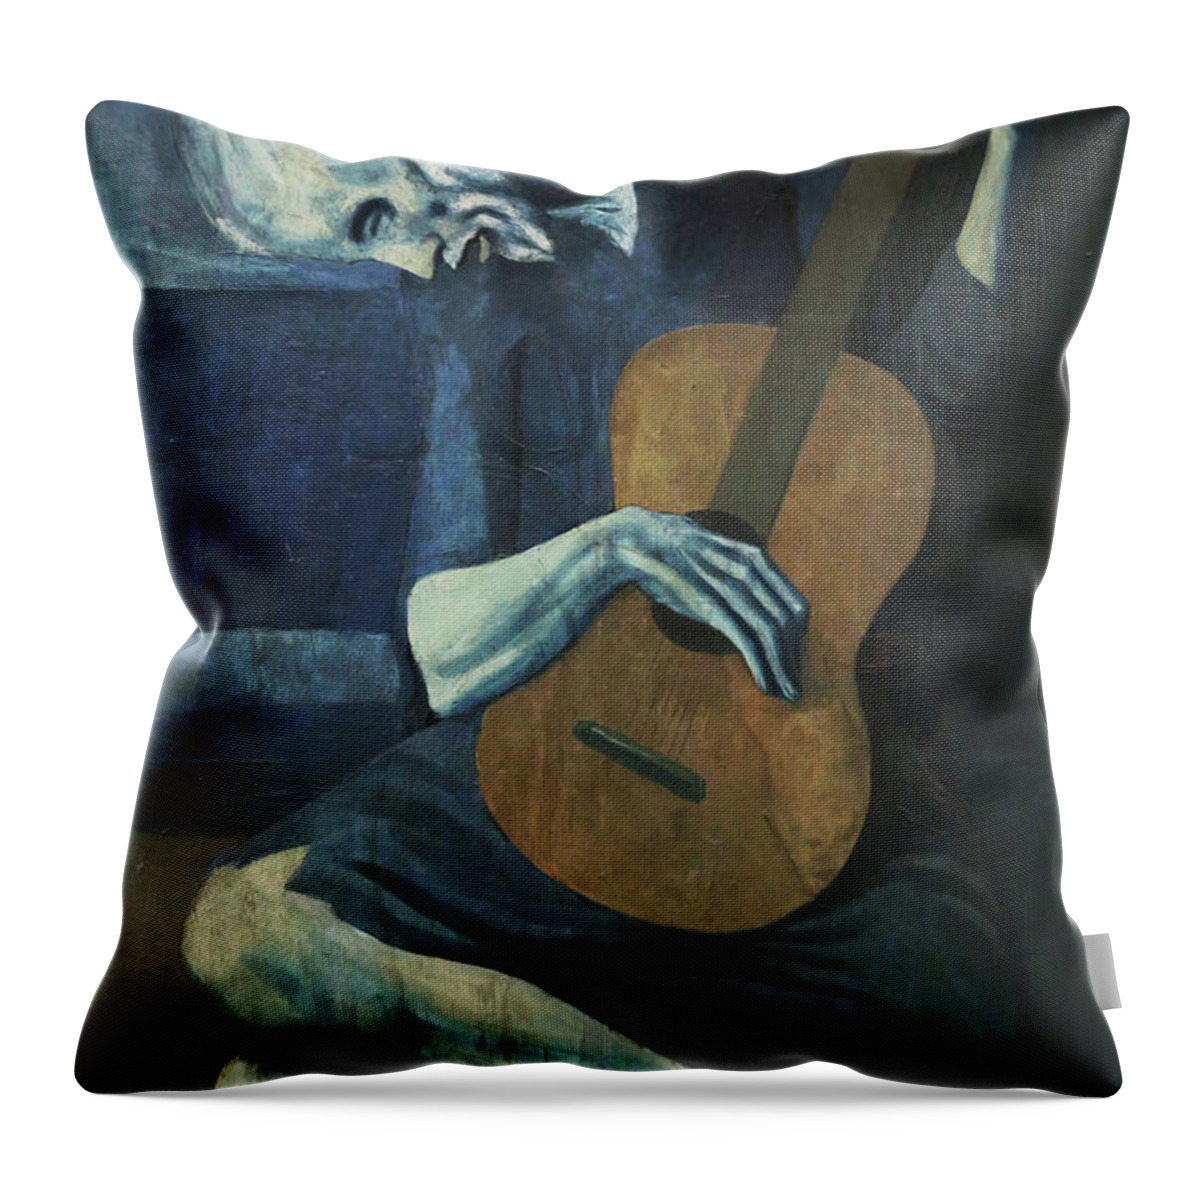 Old Throw Pillow featuring the painting The Old Guitarist by Pablo Picasso